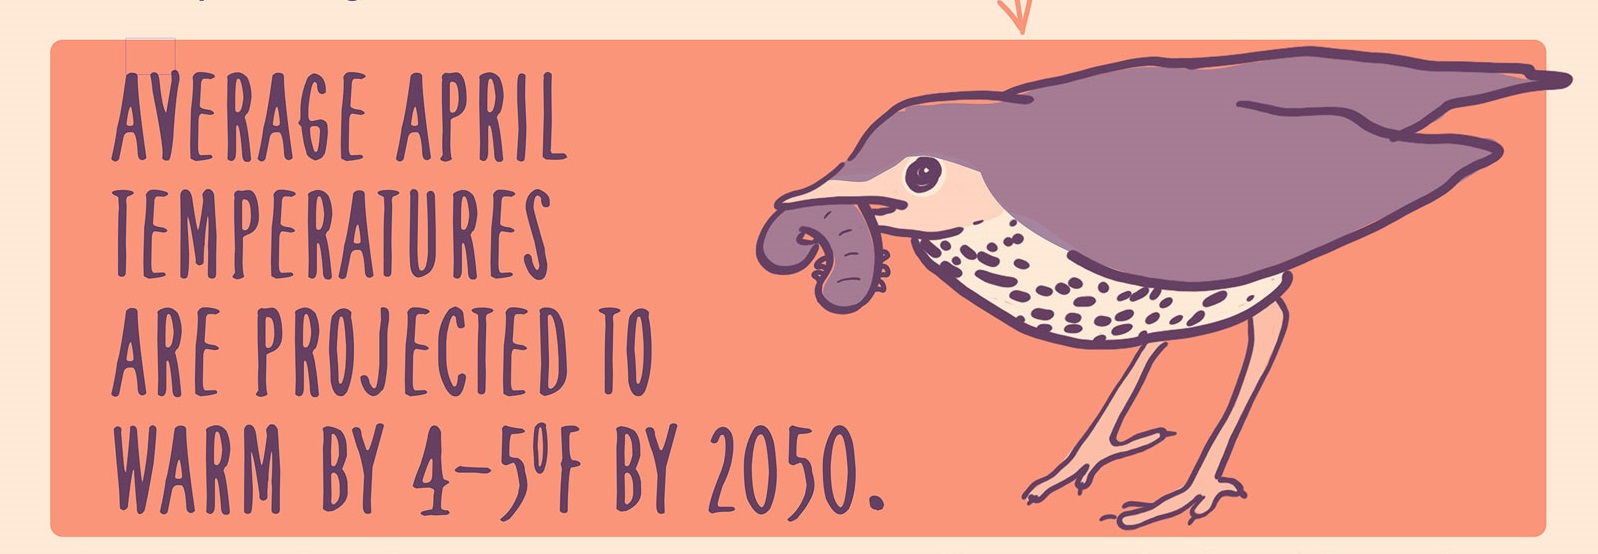 illustration of a woodthrush with a worm, text" Average april temps are projected to warm by 4-5 deg by 2050"